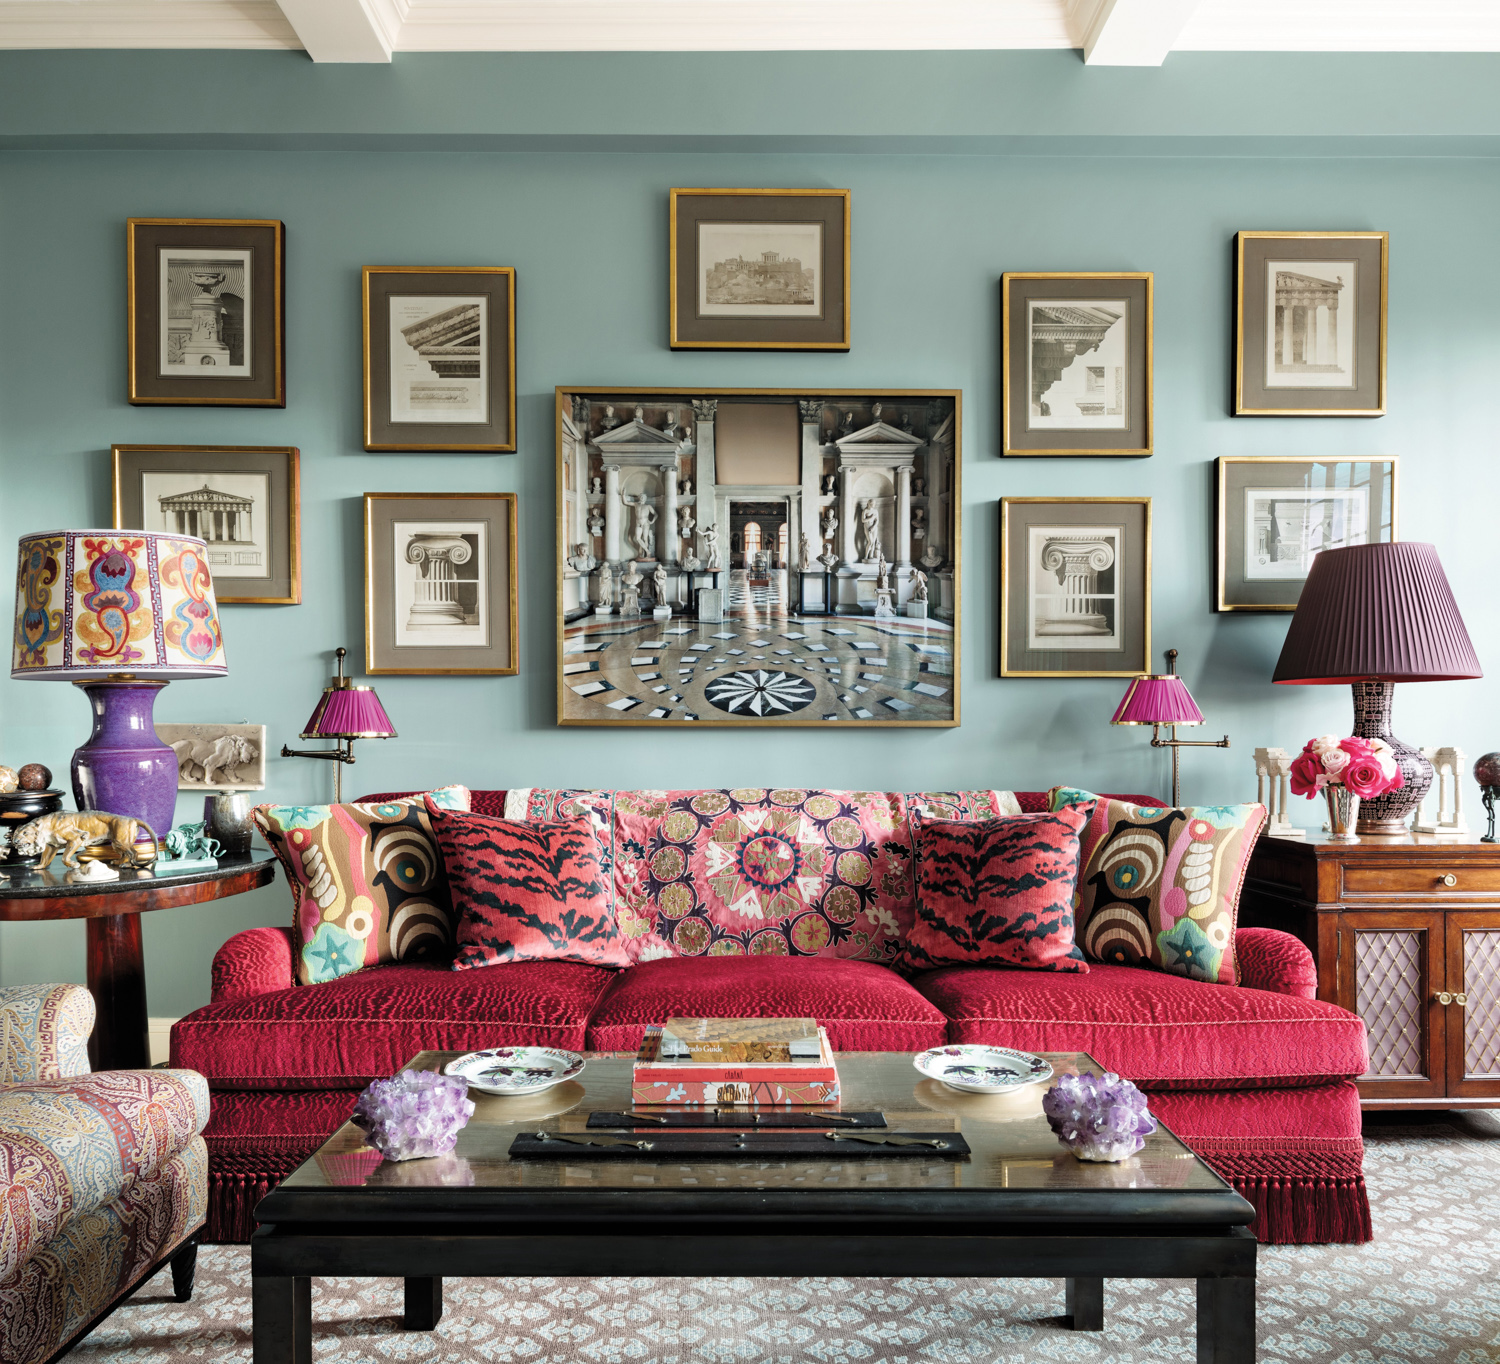 Maximalist seating area with pink patterned sofa in front of a mint-colored wall featuring various artworks.